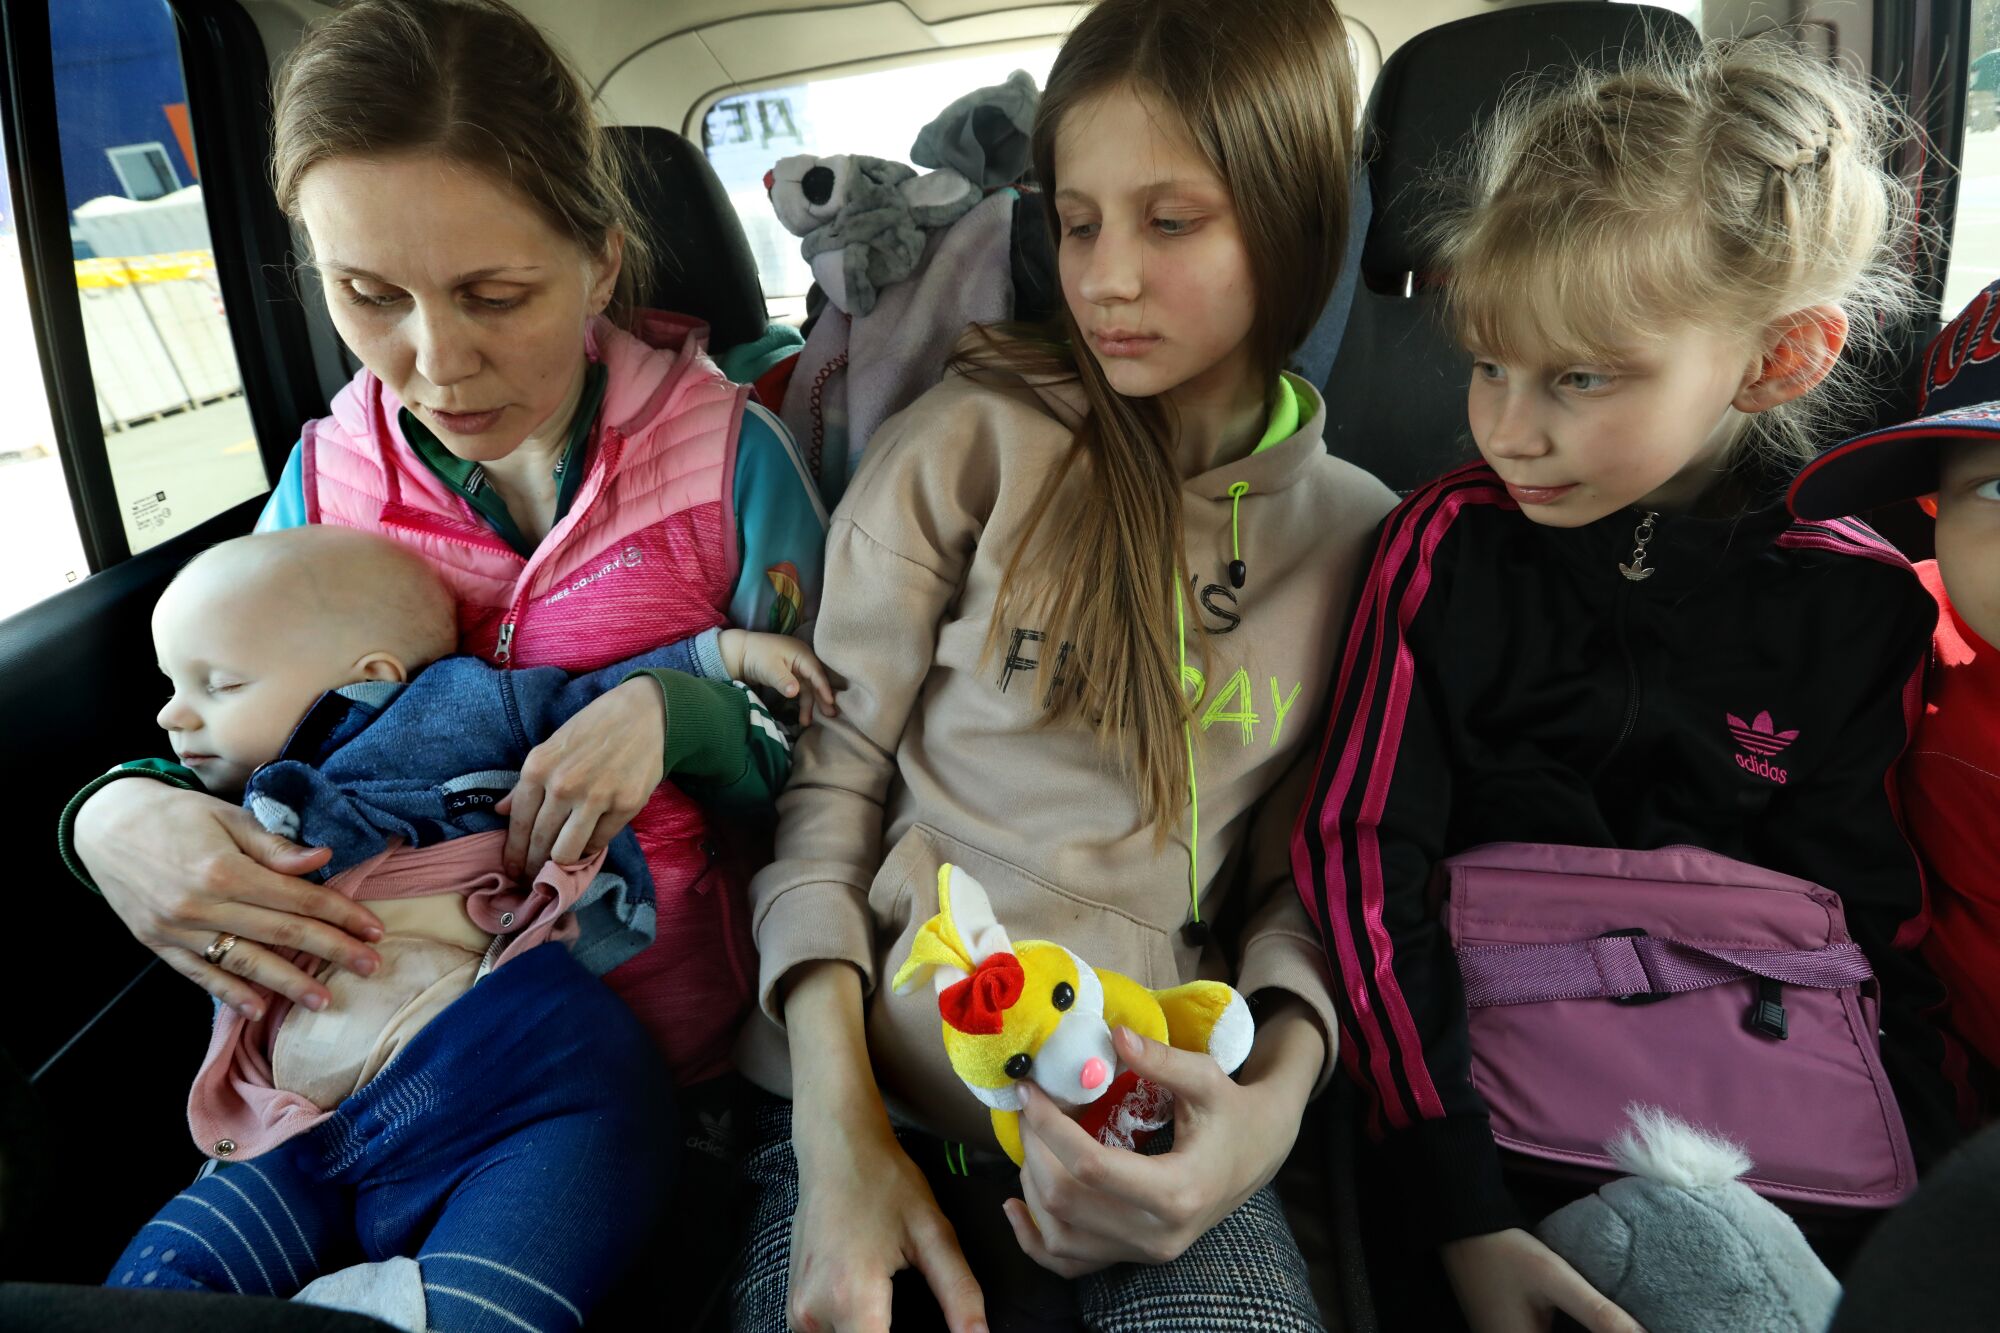  A woman in a car shows her baby's bandaged abdomen as two other children sit next to them, holding stuffed animals 